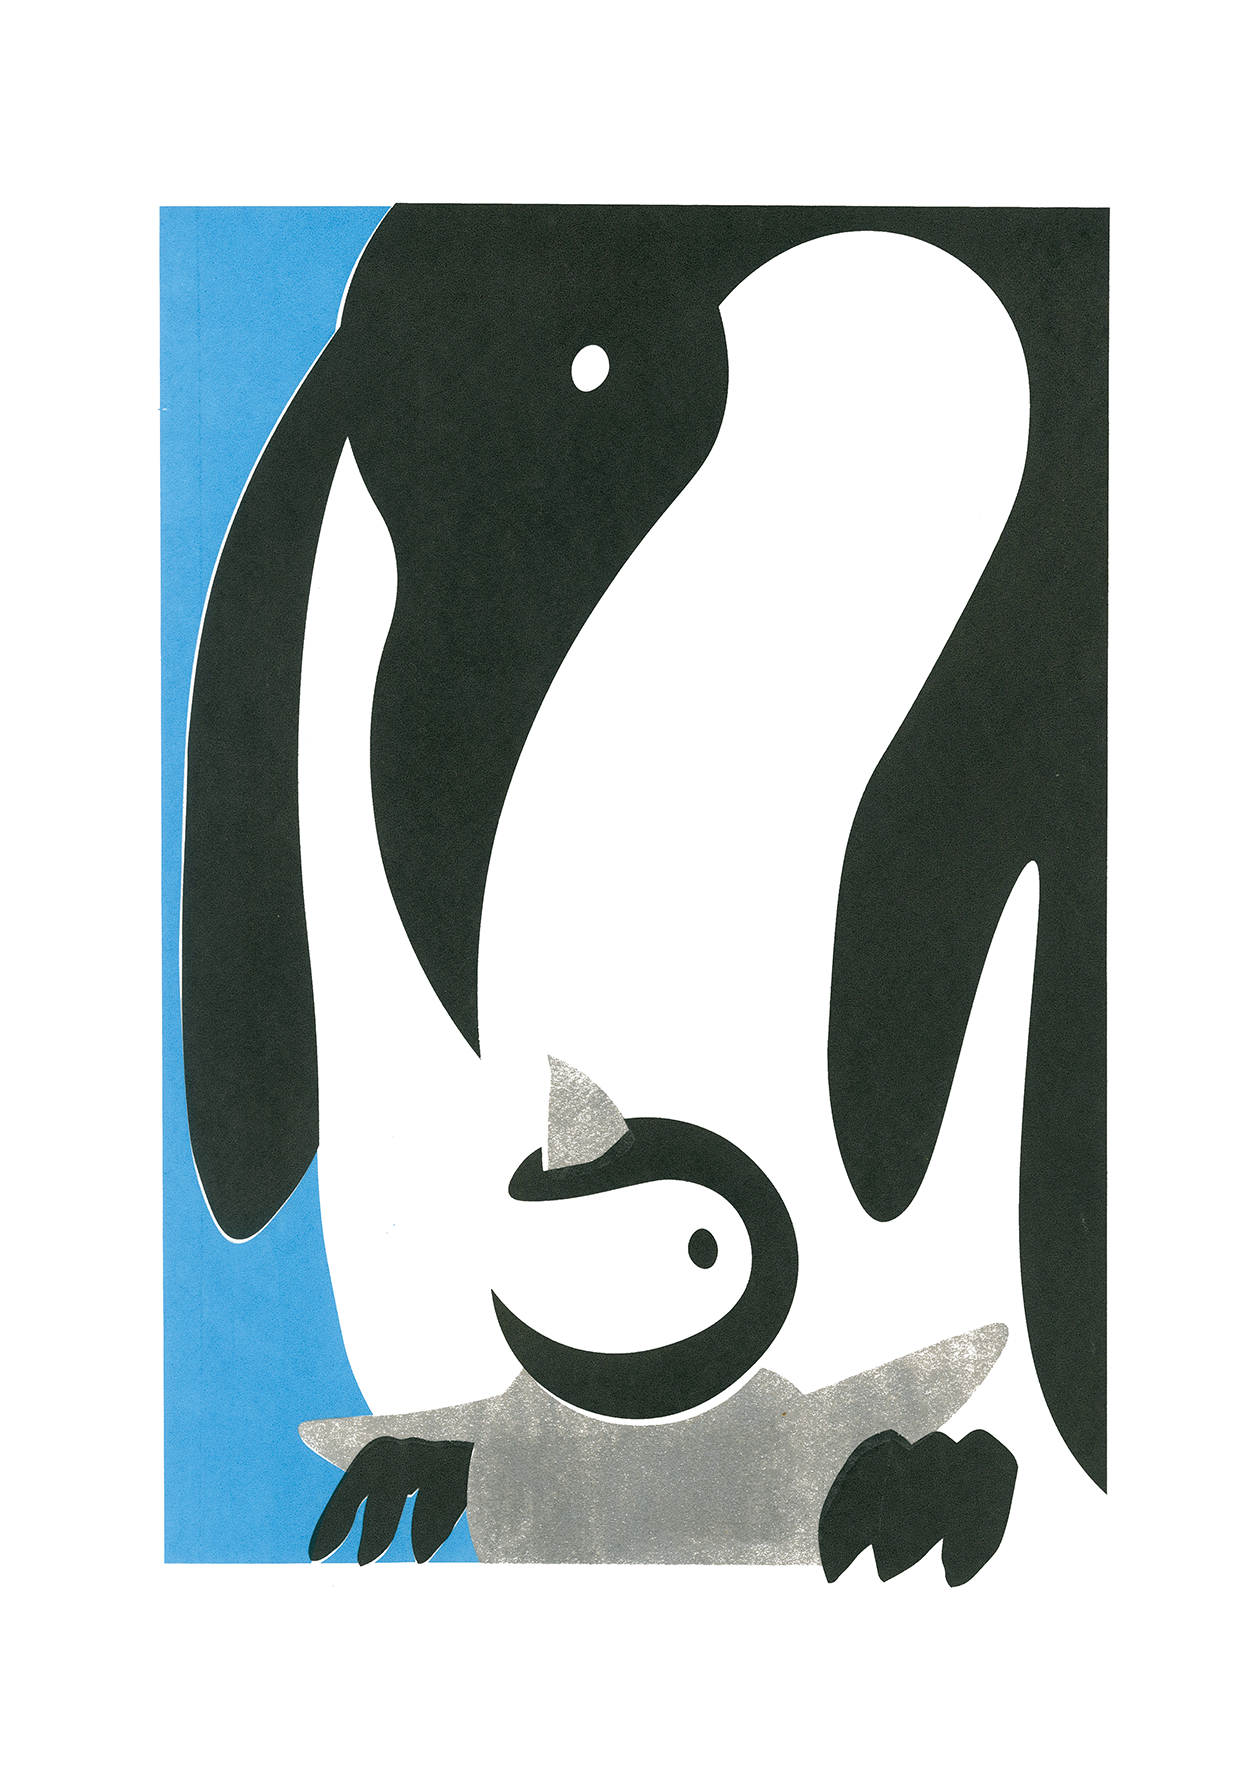 A Screen Print, by William Goldsmith, depicting a father penguin nurturing their young chick.